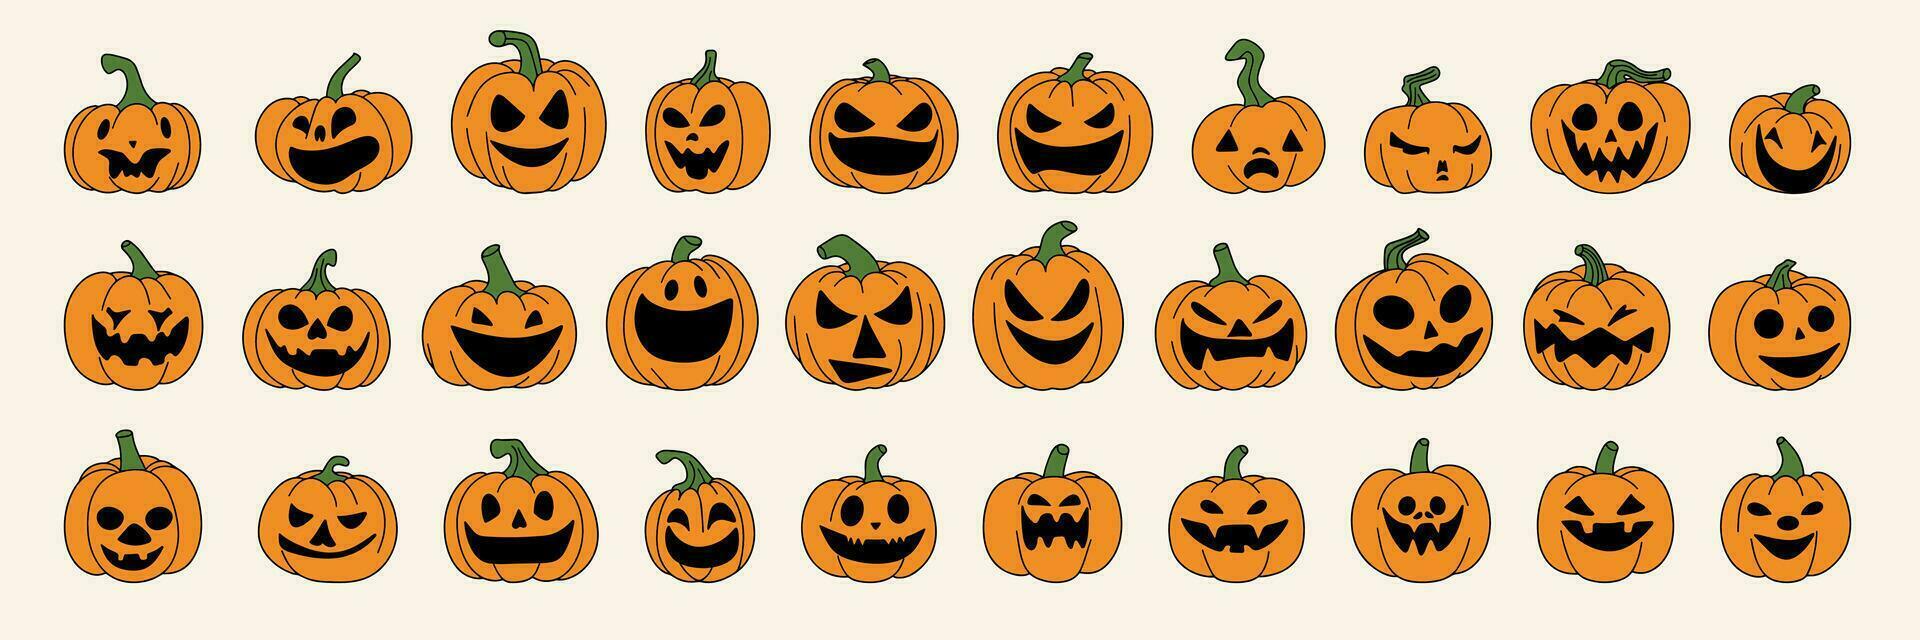 Large collection of Halloween pumpkin icons. Set of Jack o Lantern in doodle style isolated on background. Halloween pumpkin hand drawn logo set. Vector illustration.